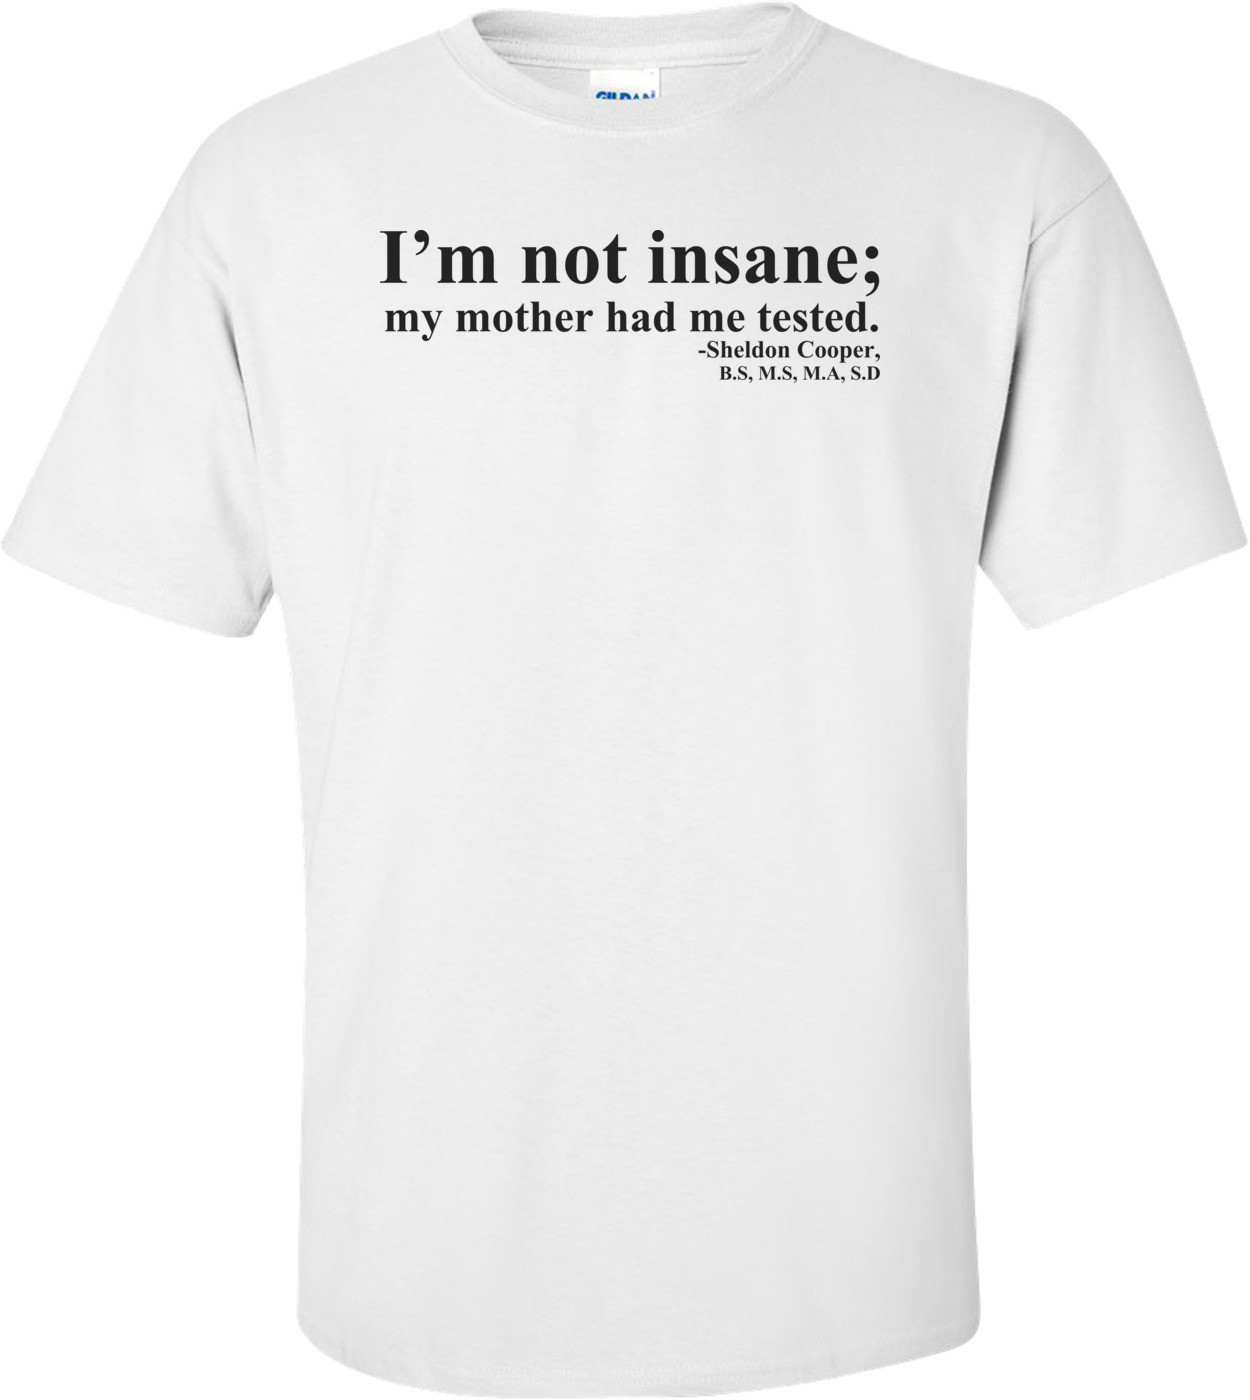 I'm Not Insane, My Mother Had Me Tested Shirt